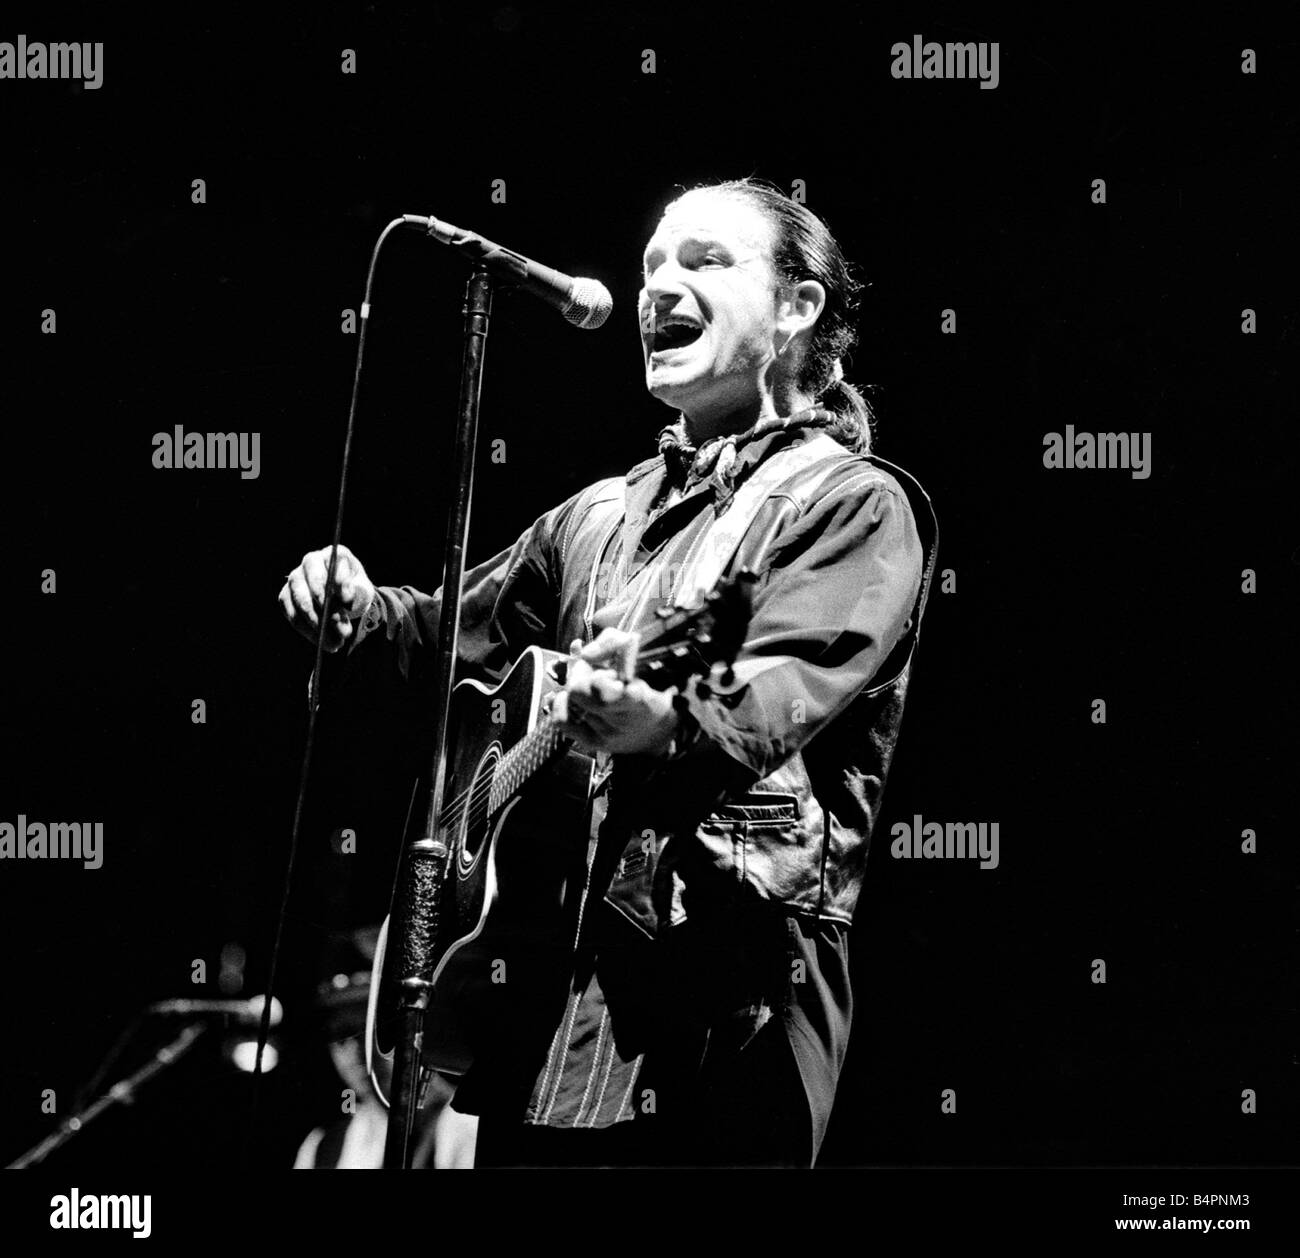 Rock group U2 in concert in USA May 1987 Bono singing and playing guitar Stock Photo